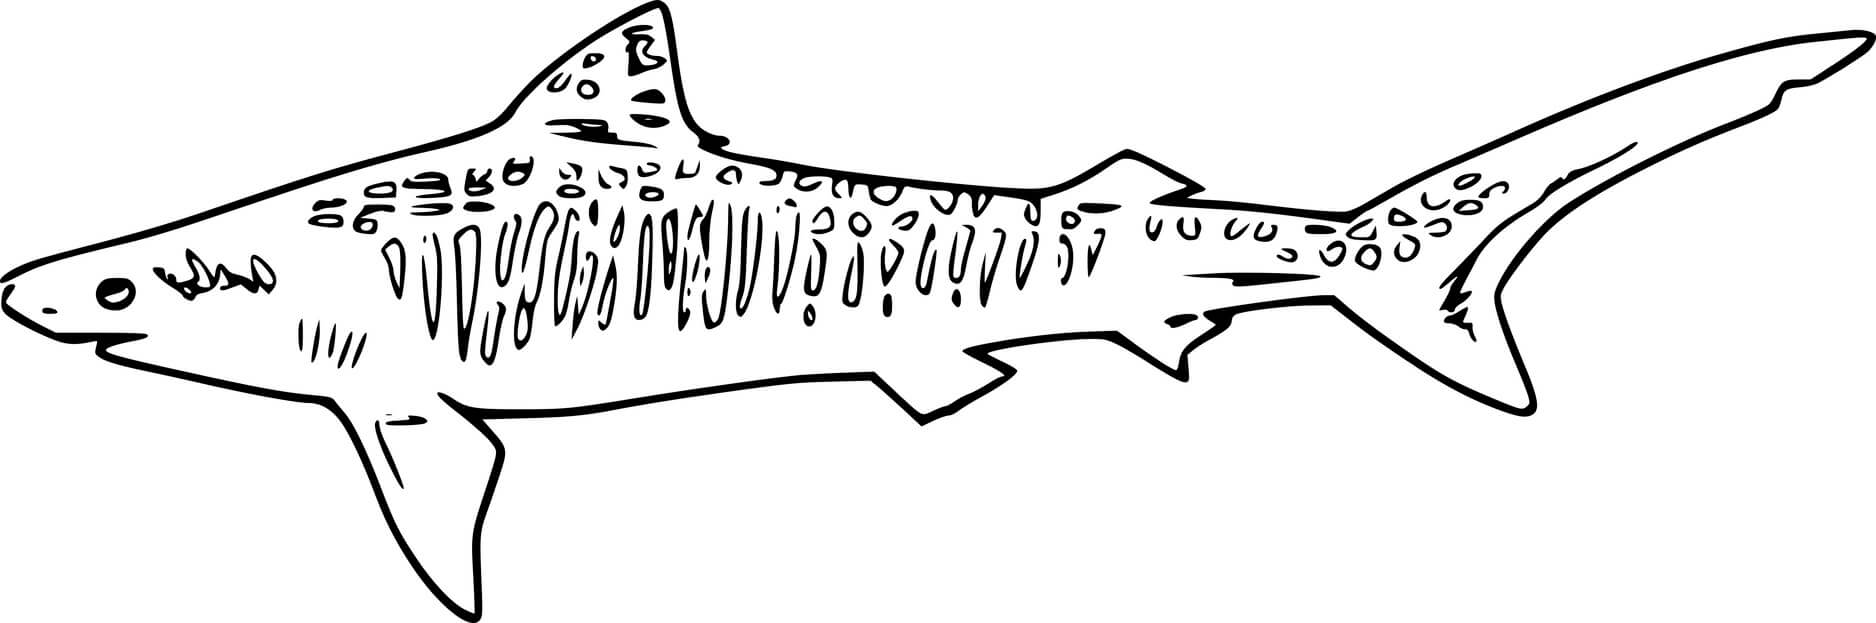 Swimming Sand Tiger Shark Coloring Page